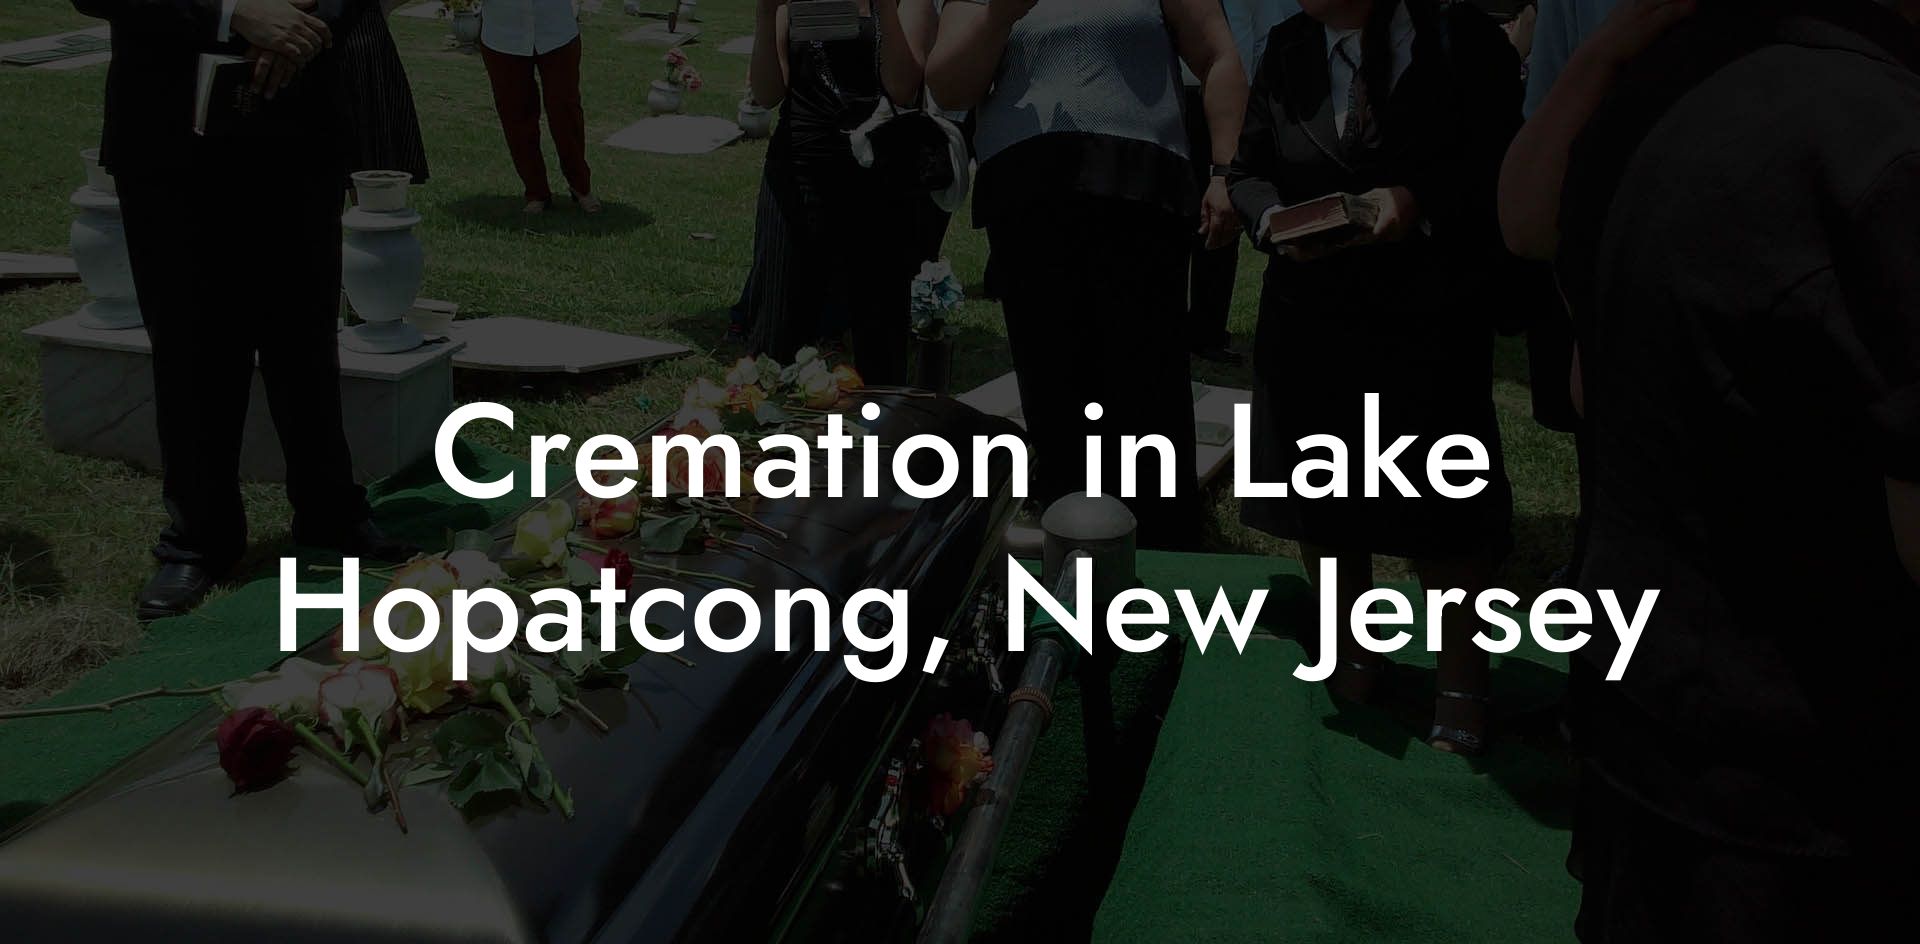 Cremation in Lake Hopatcong, New Jersey